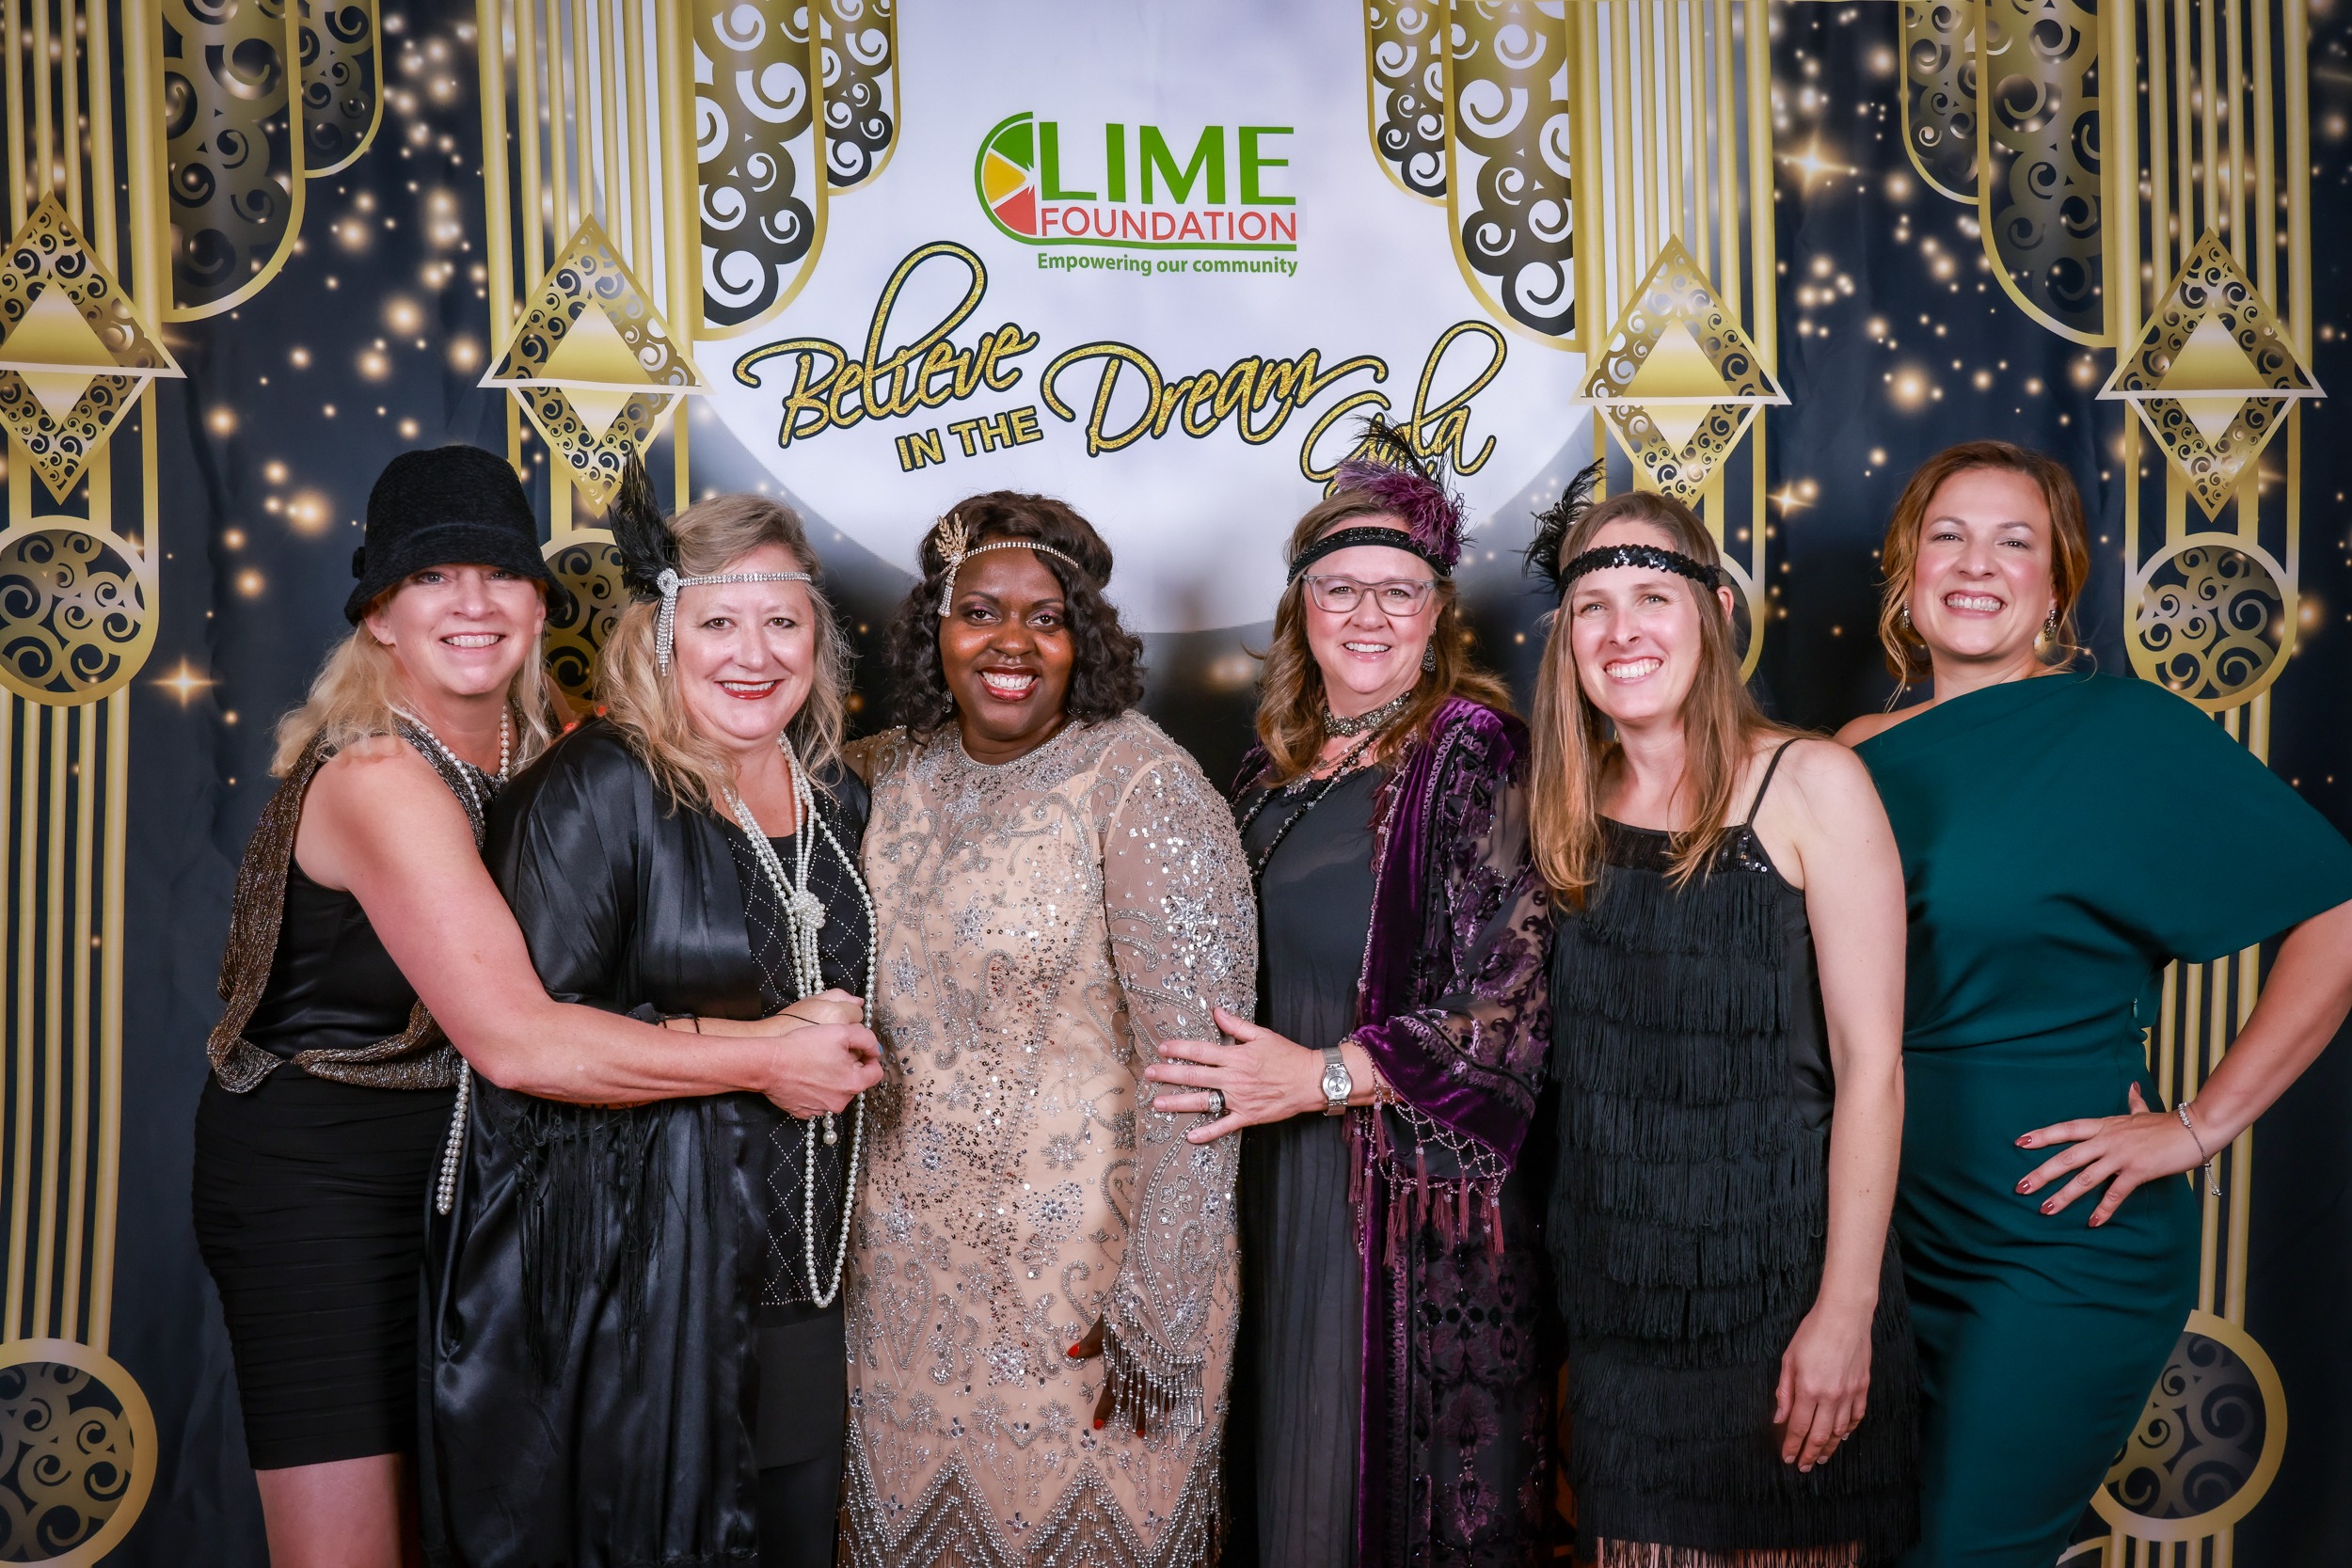 A group of women posing for a photo at a 1920's themed party hosted by The LIME Foundation of Santa Rosa, a Sonoma County Non-Profit.